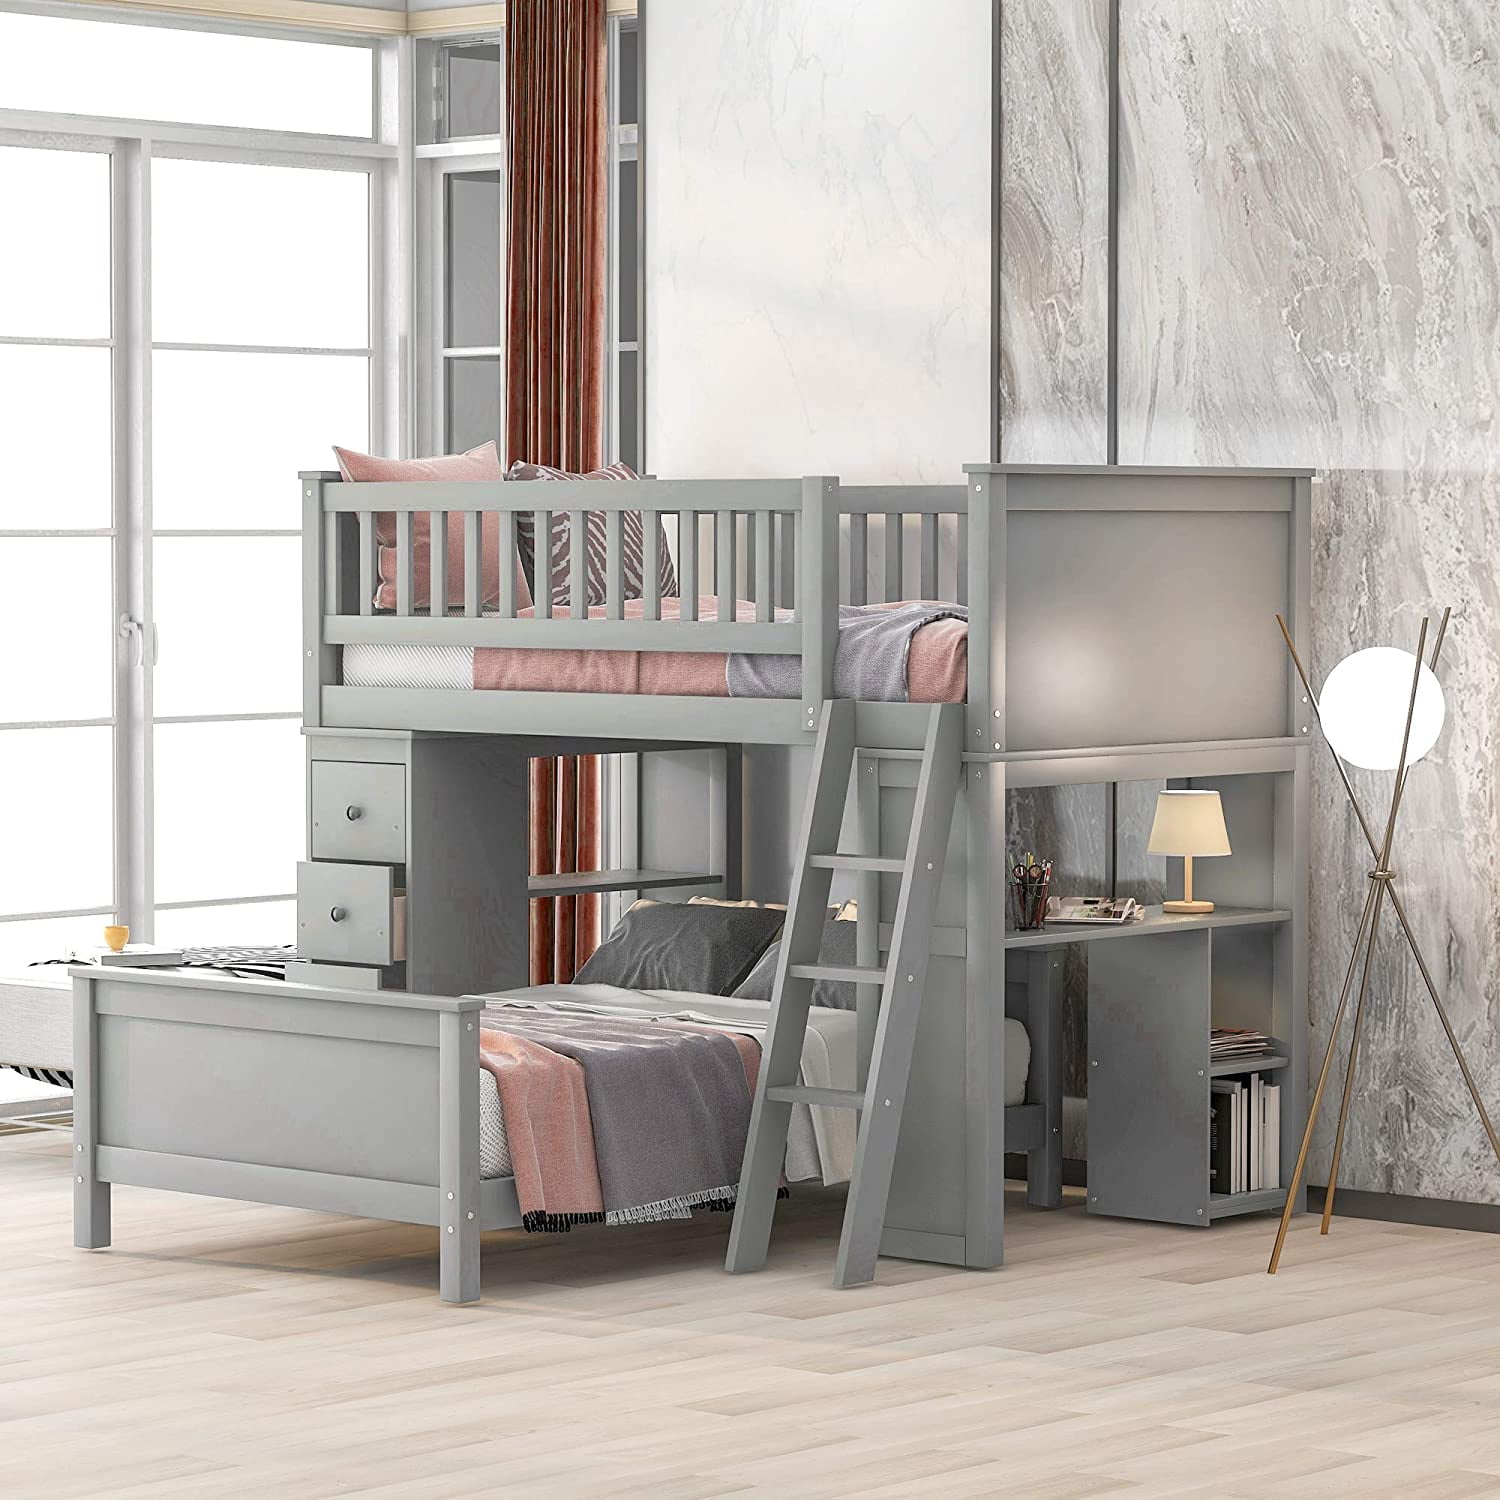 Bunk Bed Twin Over Loft, Bunk Beds And Loft Beds